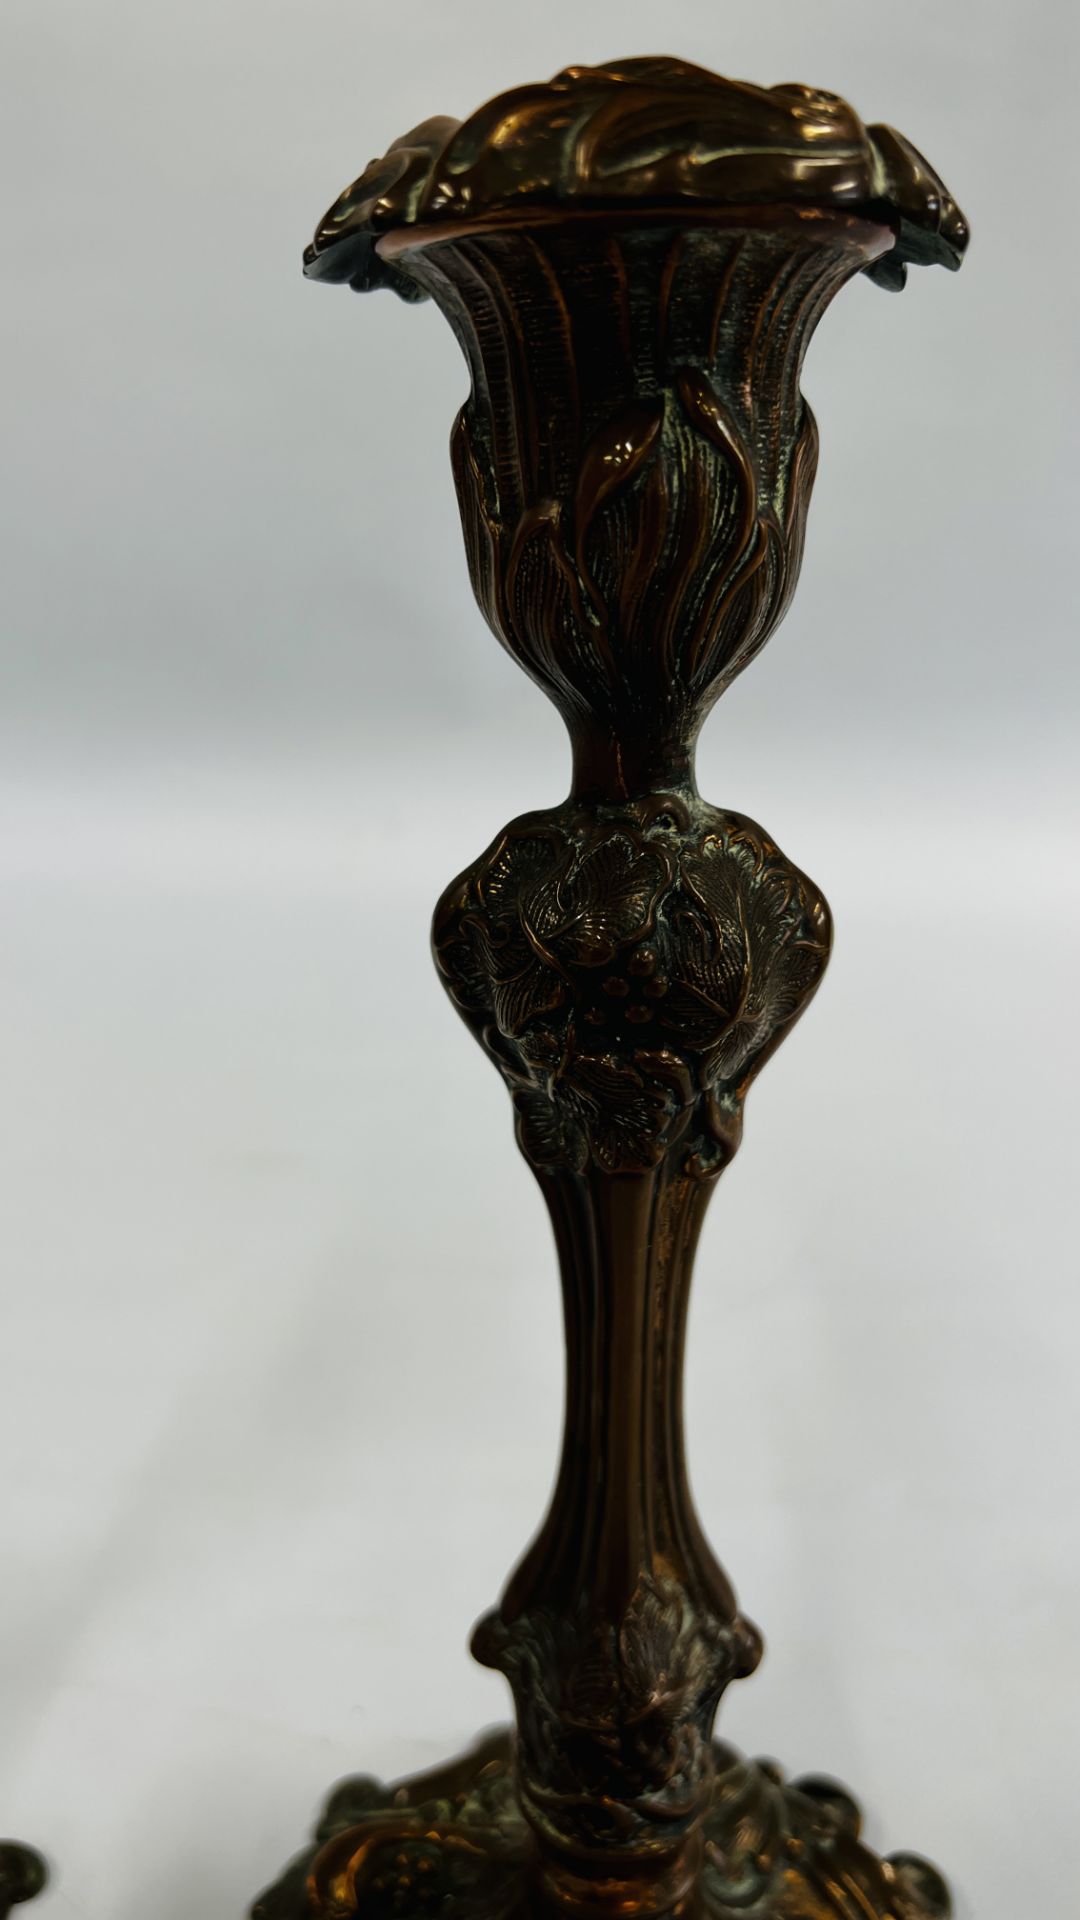 A PAIR OF ORNATE C19TH COPPER CANDLESTICKS WITH DETACHABLE SCONCES - HEIGHT 27CM. - Image 15 of 20